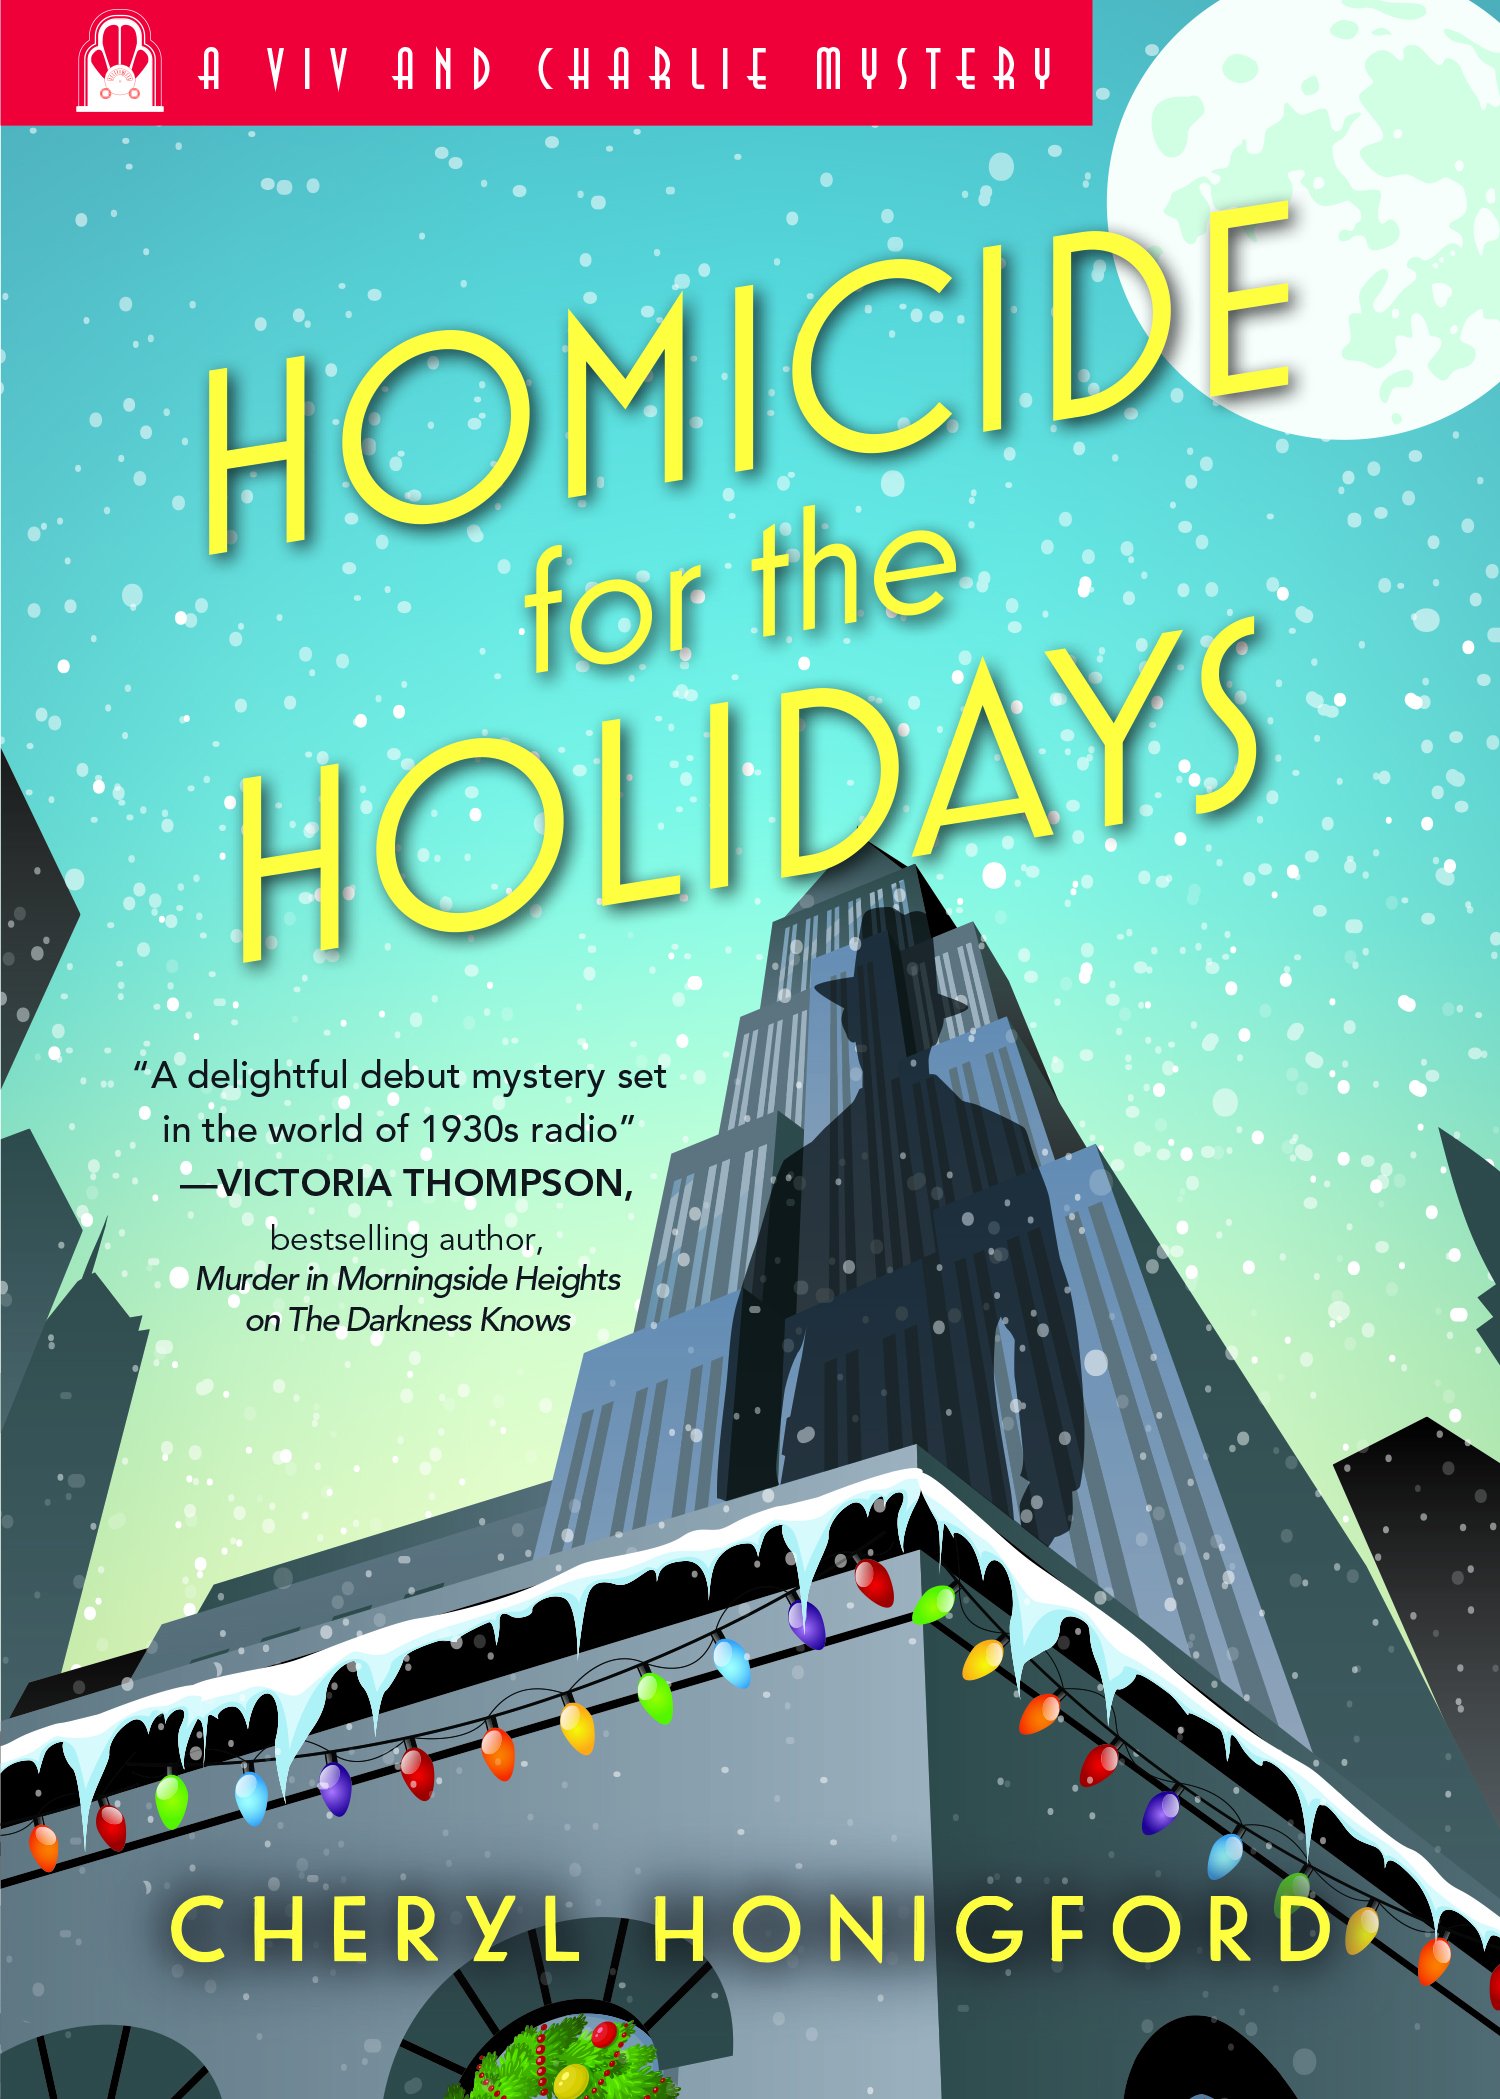 Homicide for the Holidays | Cheryl Honigford